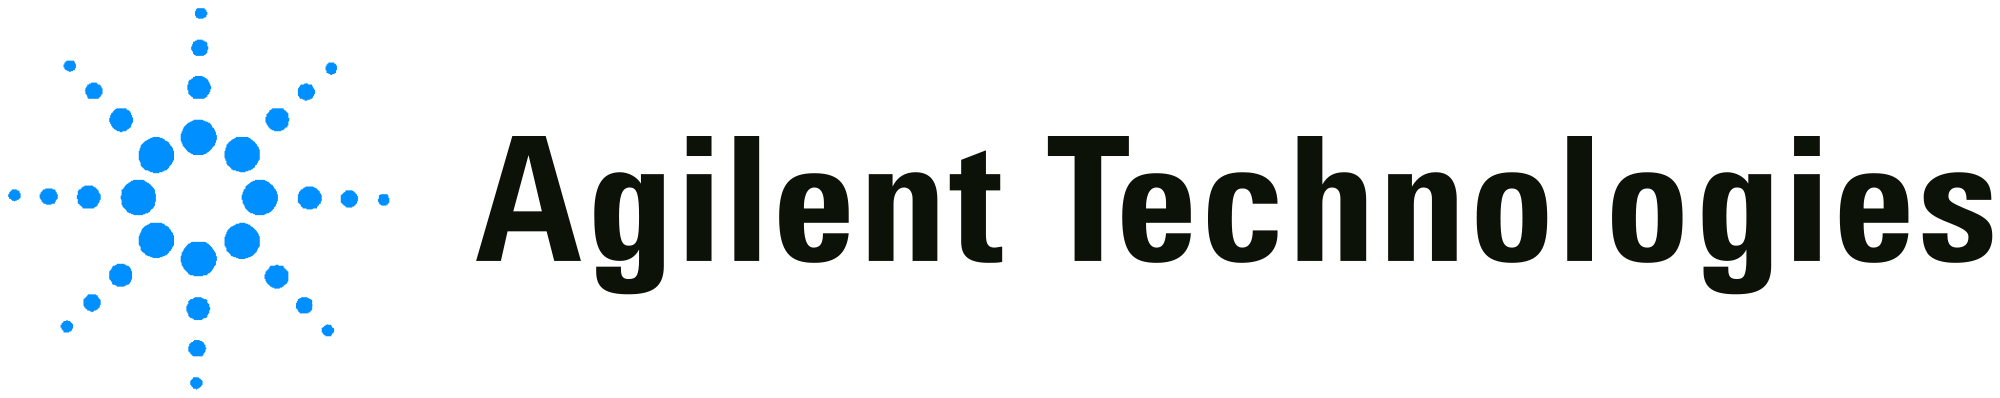 Client - Agilent Technologies Lab and Manufacturing Company